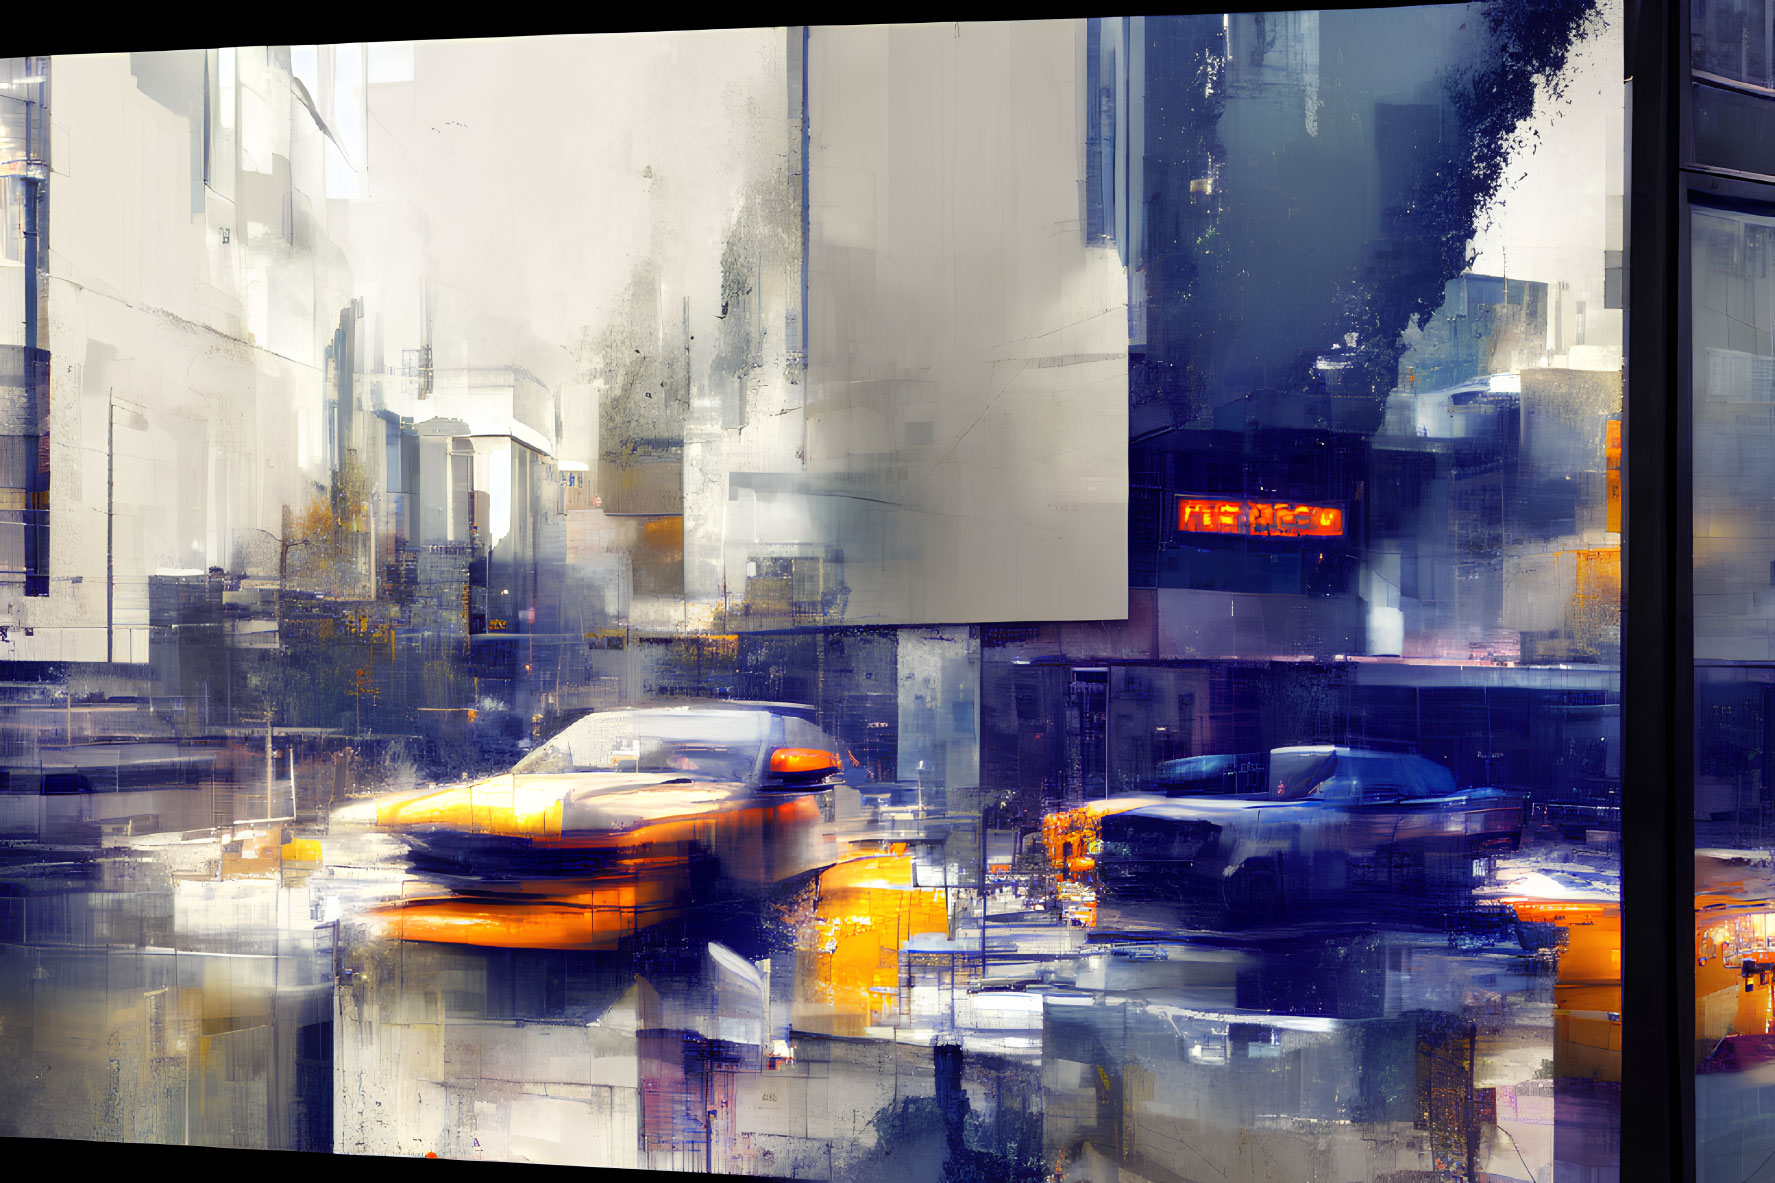 Colorful cityscape painting with dynamic brushstrokes capturing cars in motion on an urban street.